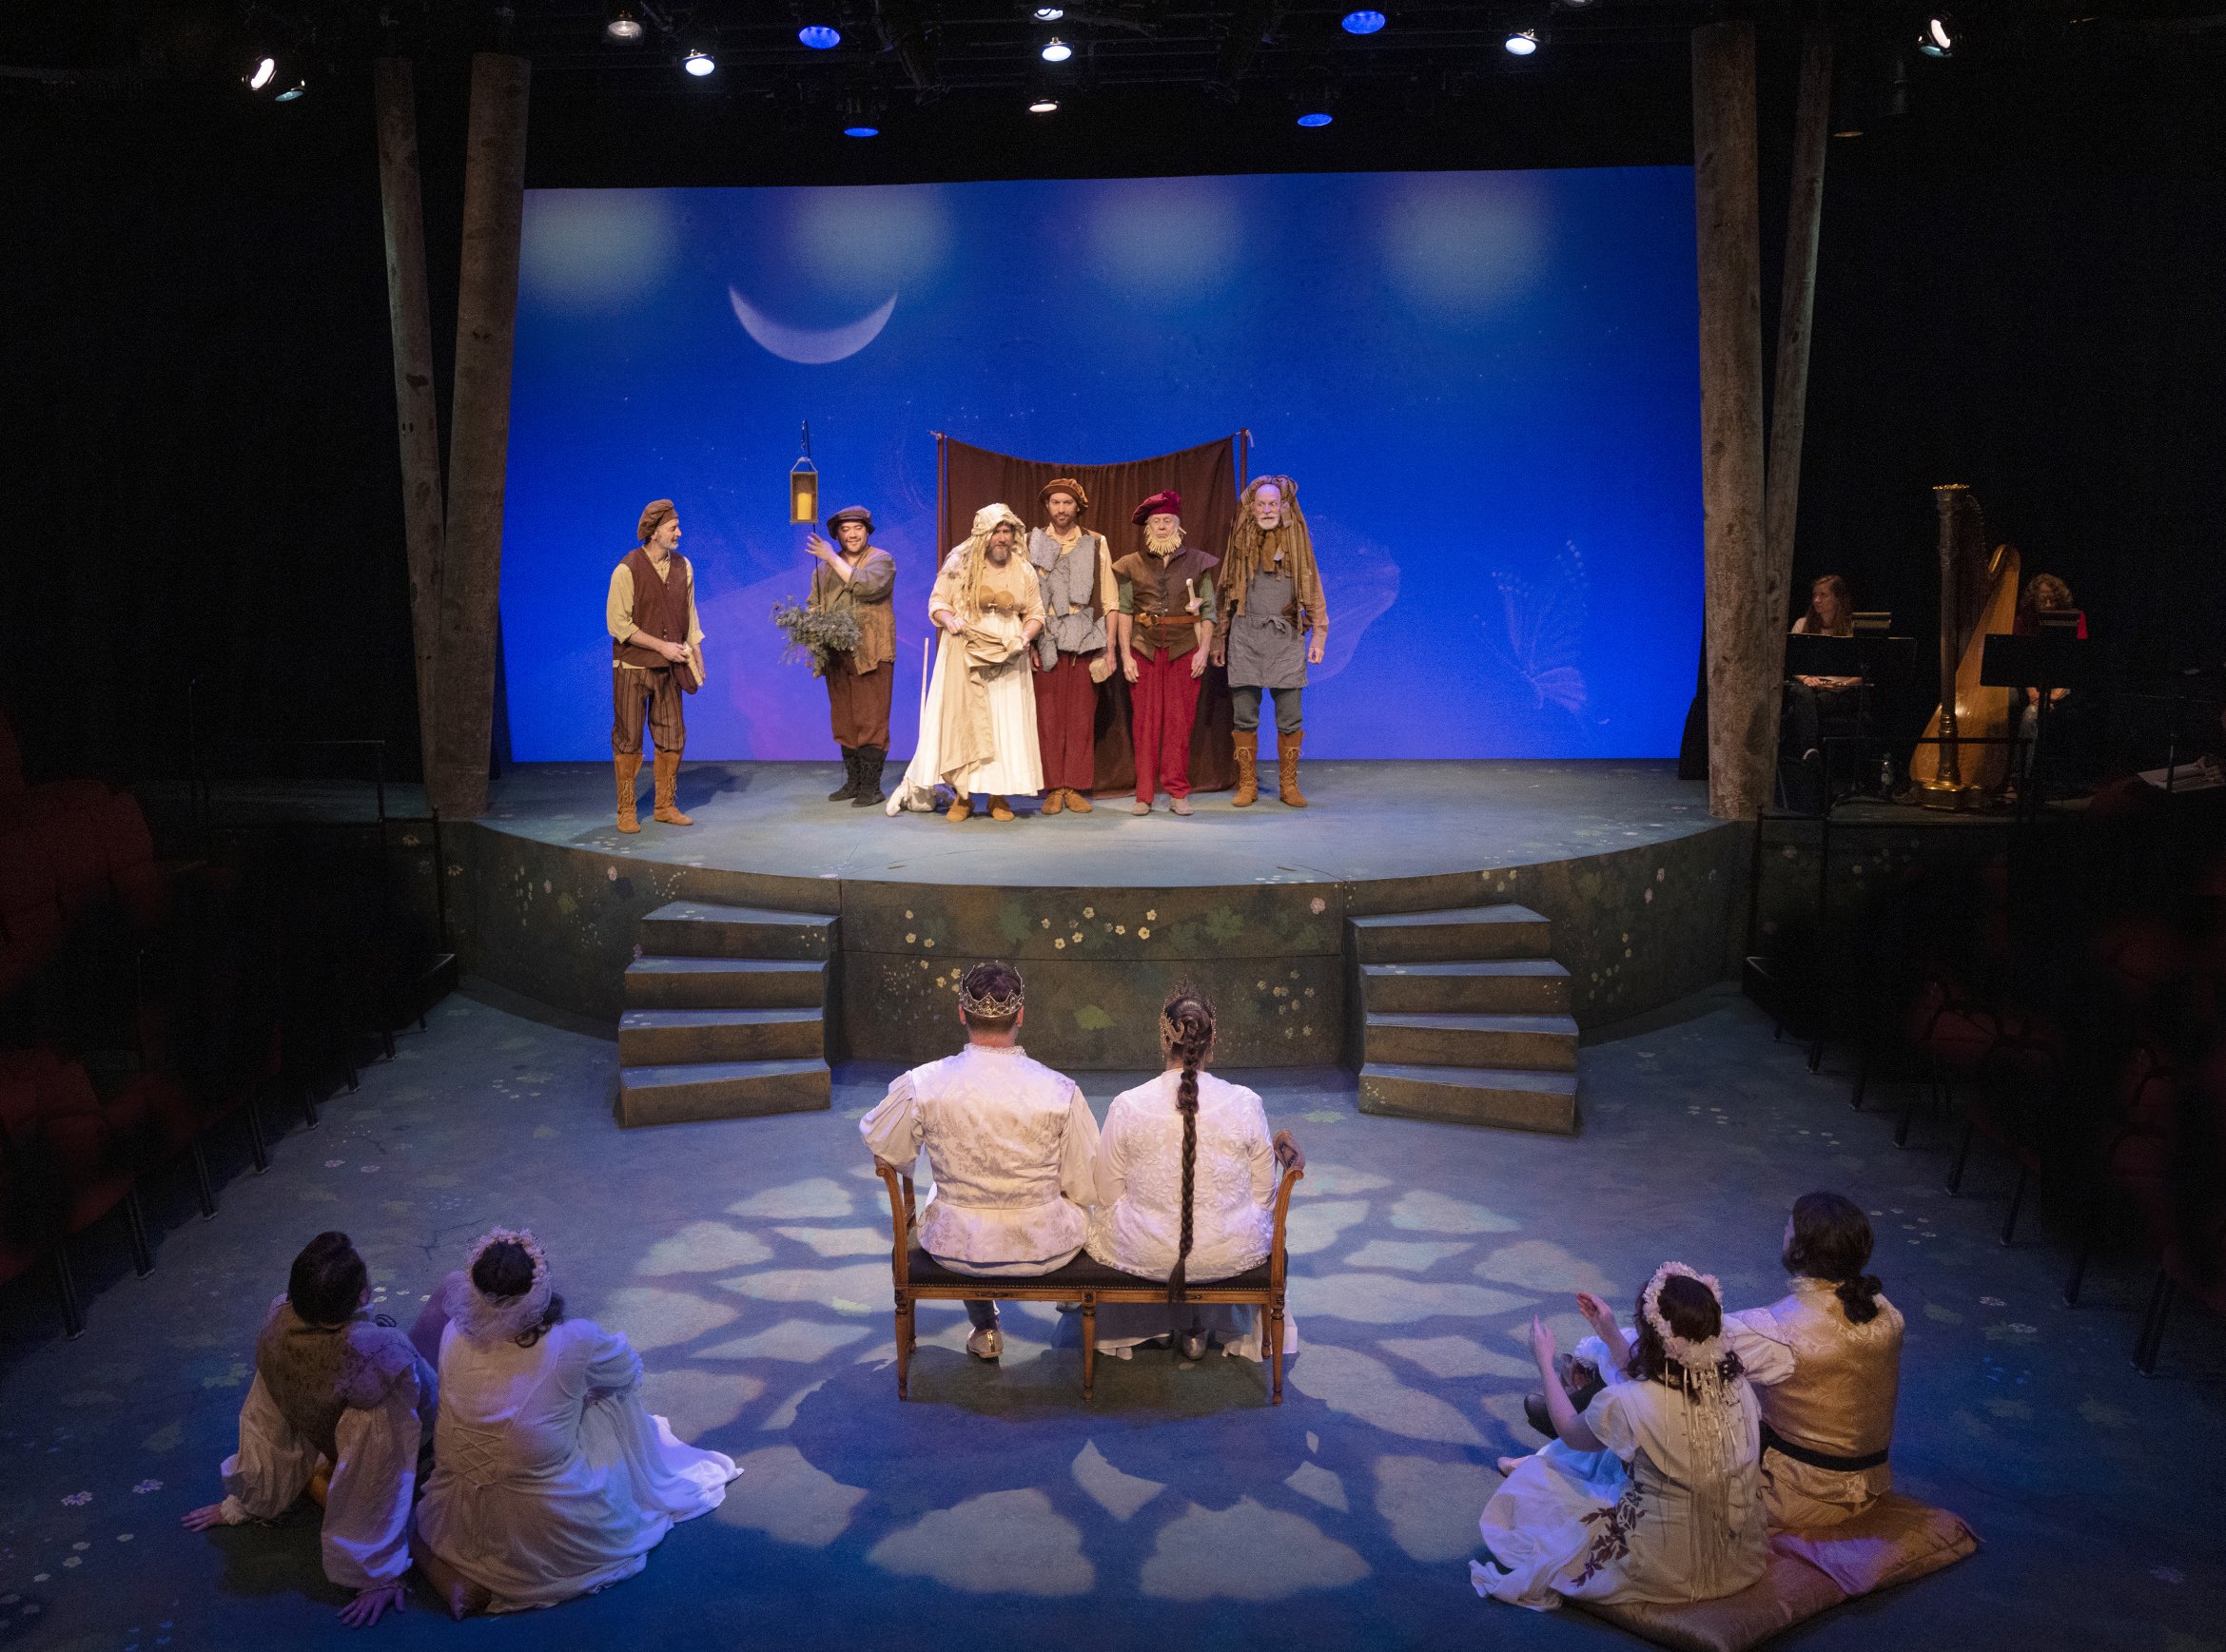 The Mechaincals perform "The Most Lamentable Comedy and Most Cruel Death of Pyramus and Thisbe" to Theseus, Hippolyta and the lovers. Photo by Tim Fuller.